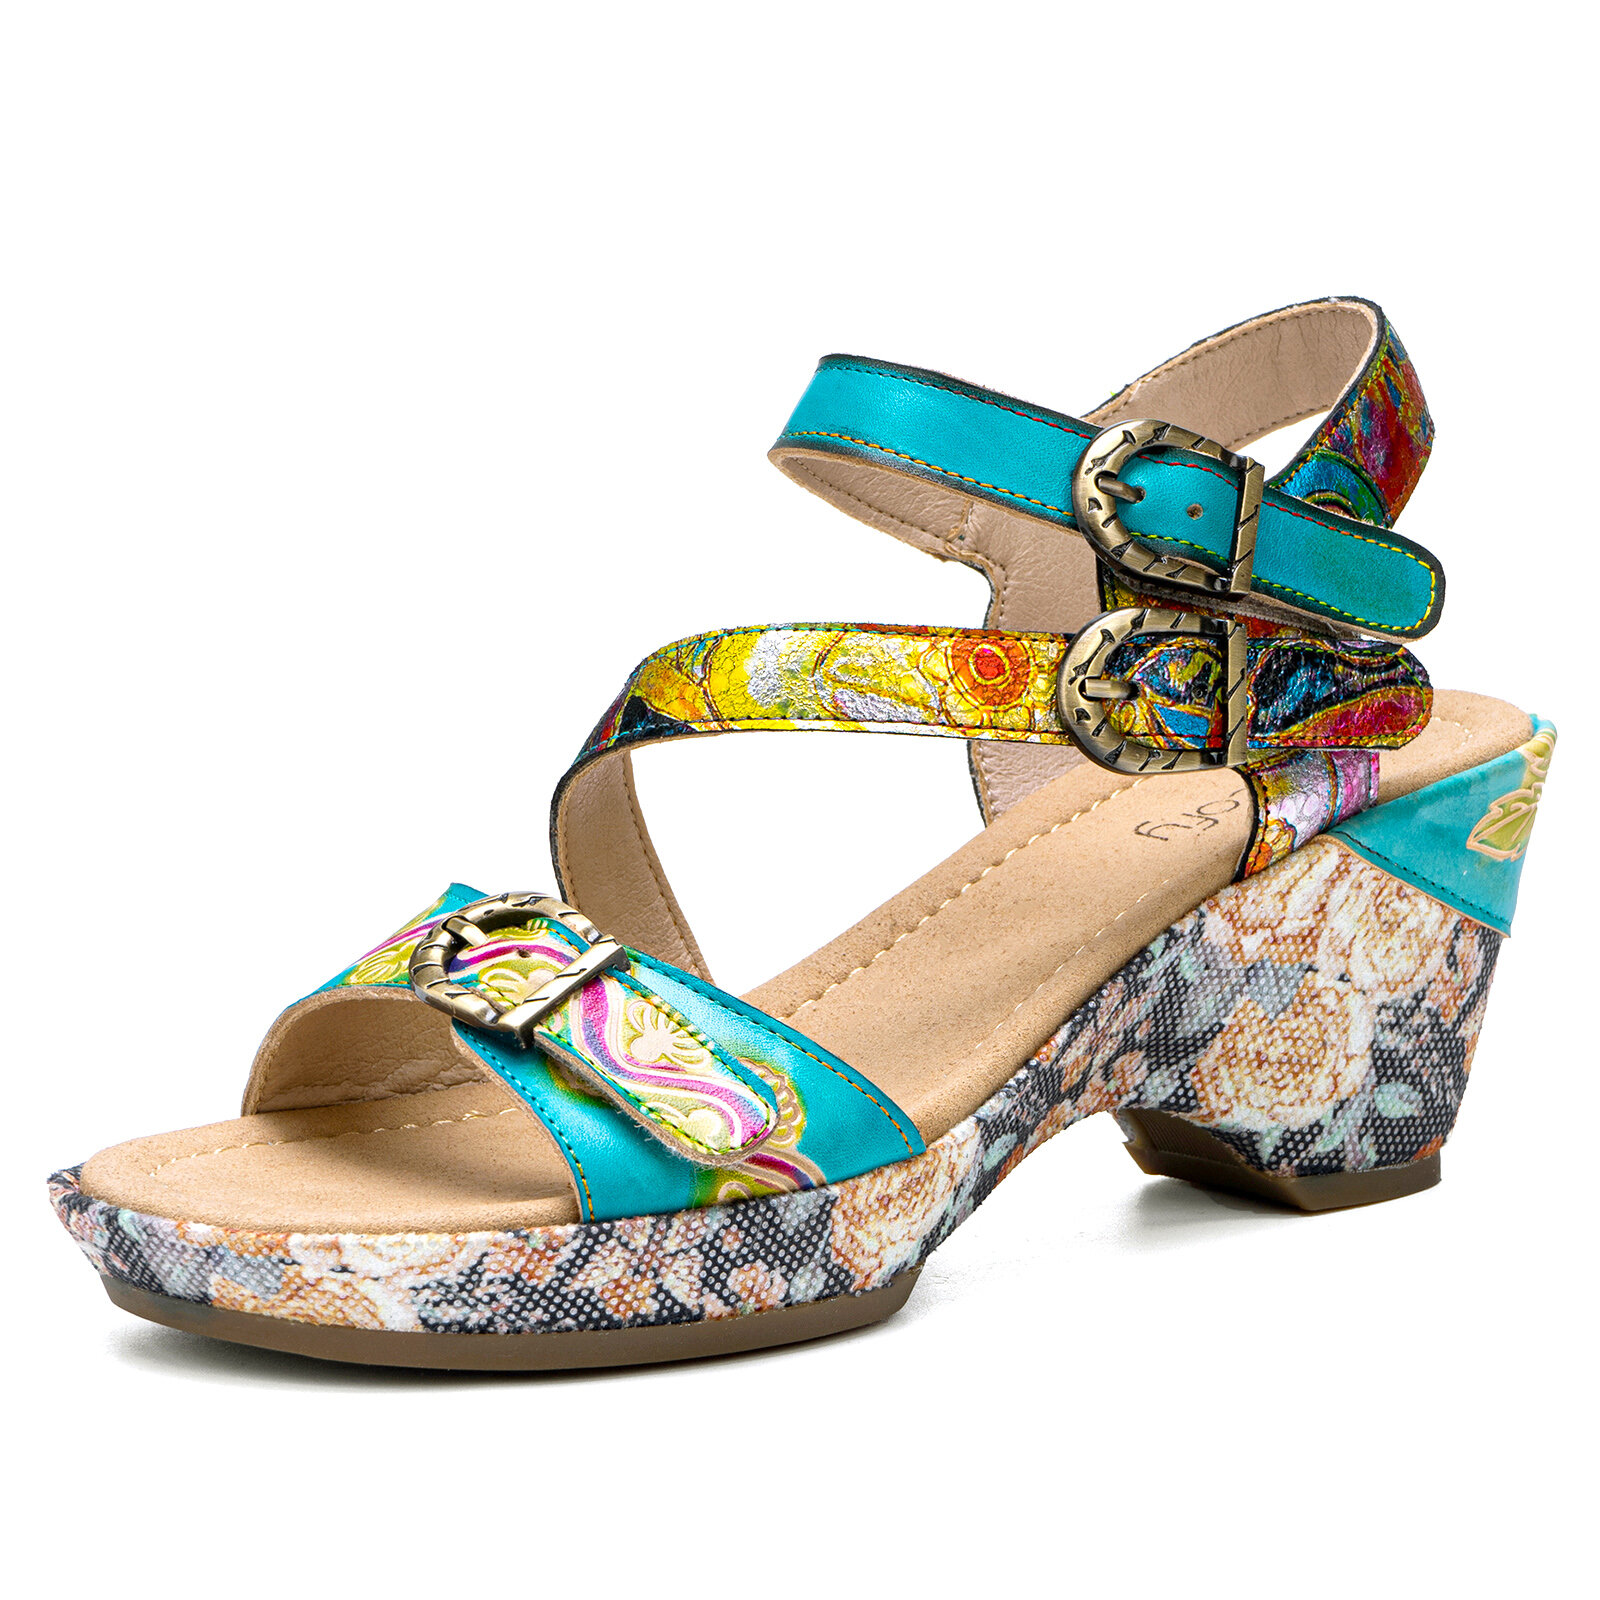 Socofy Genuine Leather Casual Bohemian Ethnic Floral Print Colorblock Comfy Heeled Stripe Sandals